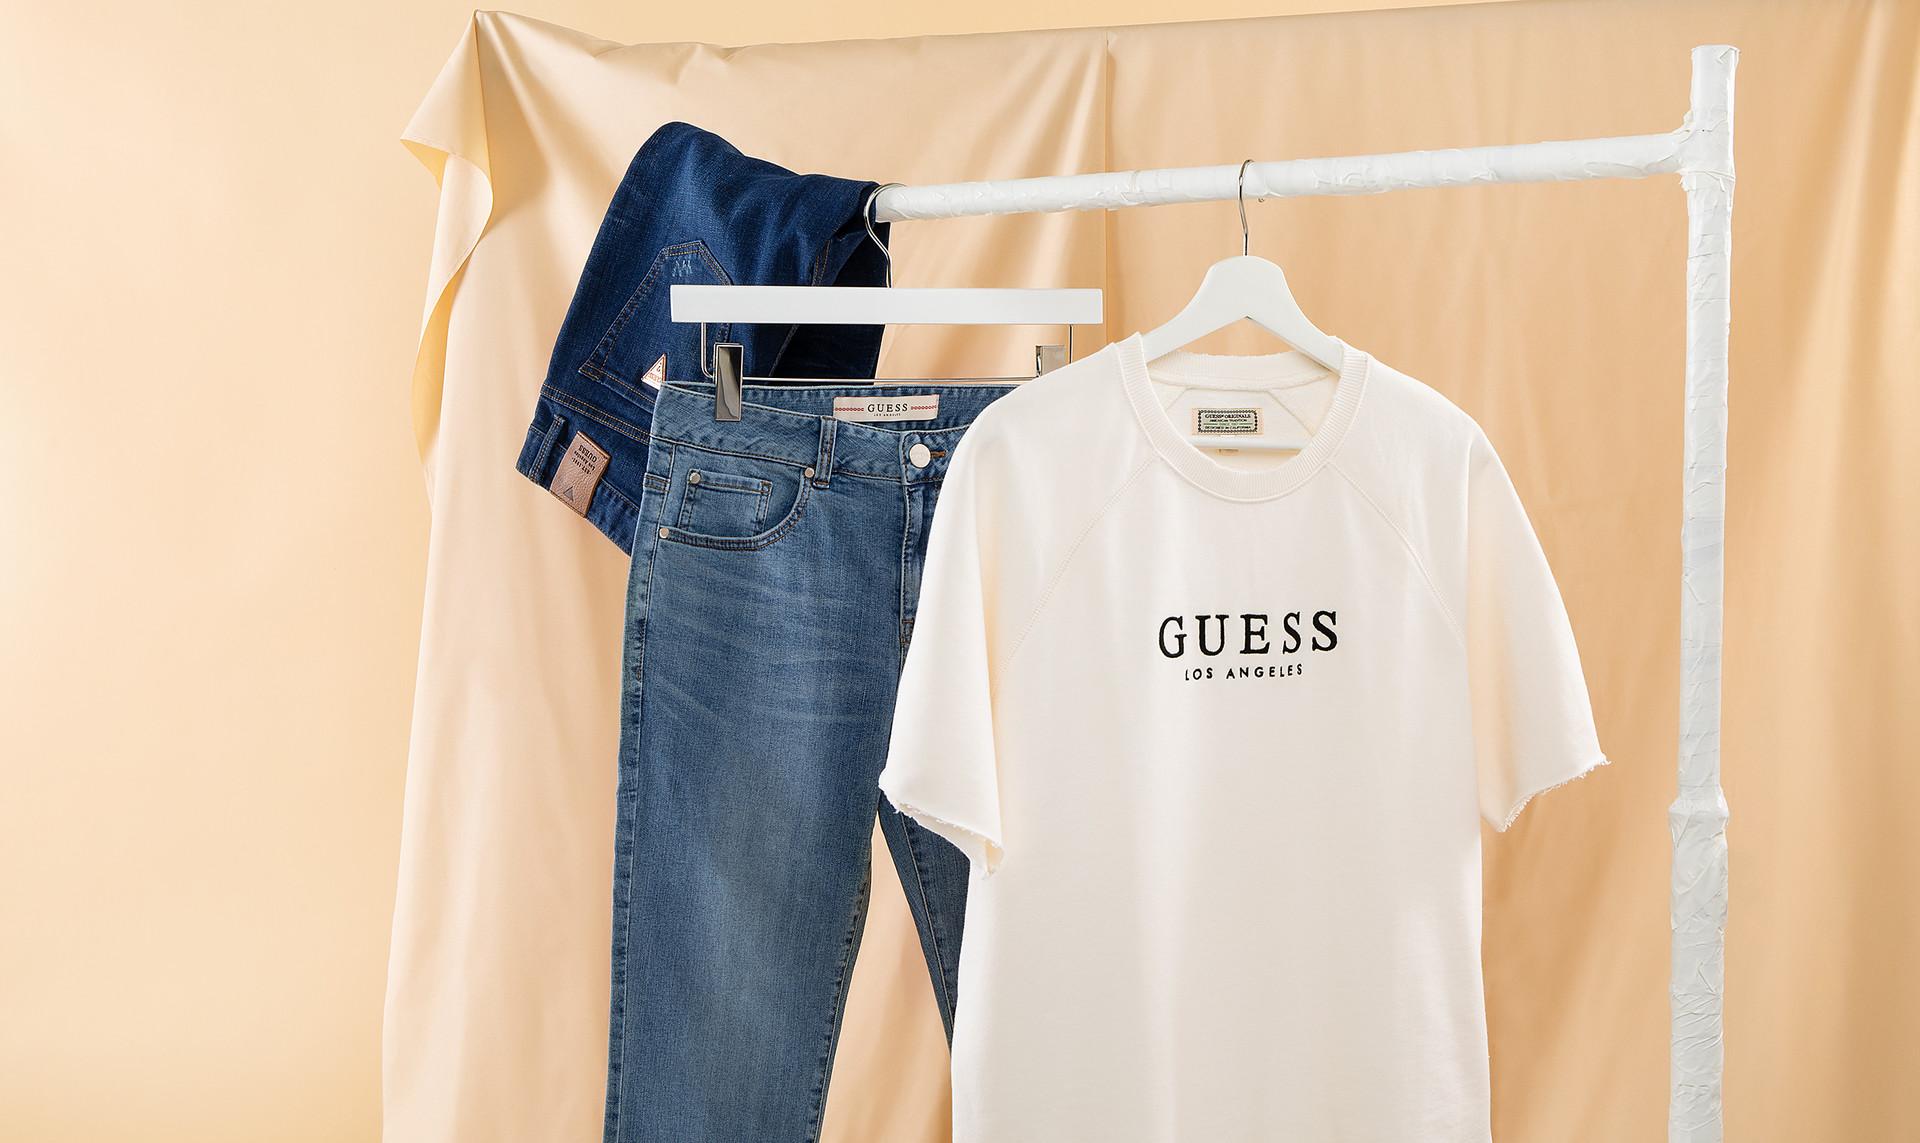 GUESS for Men